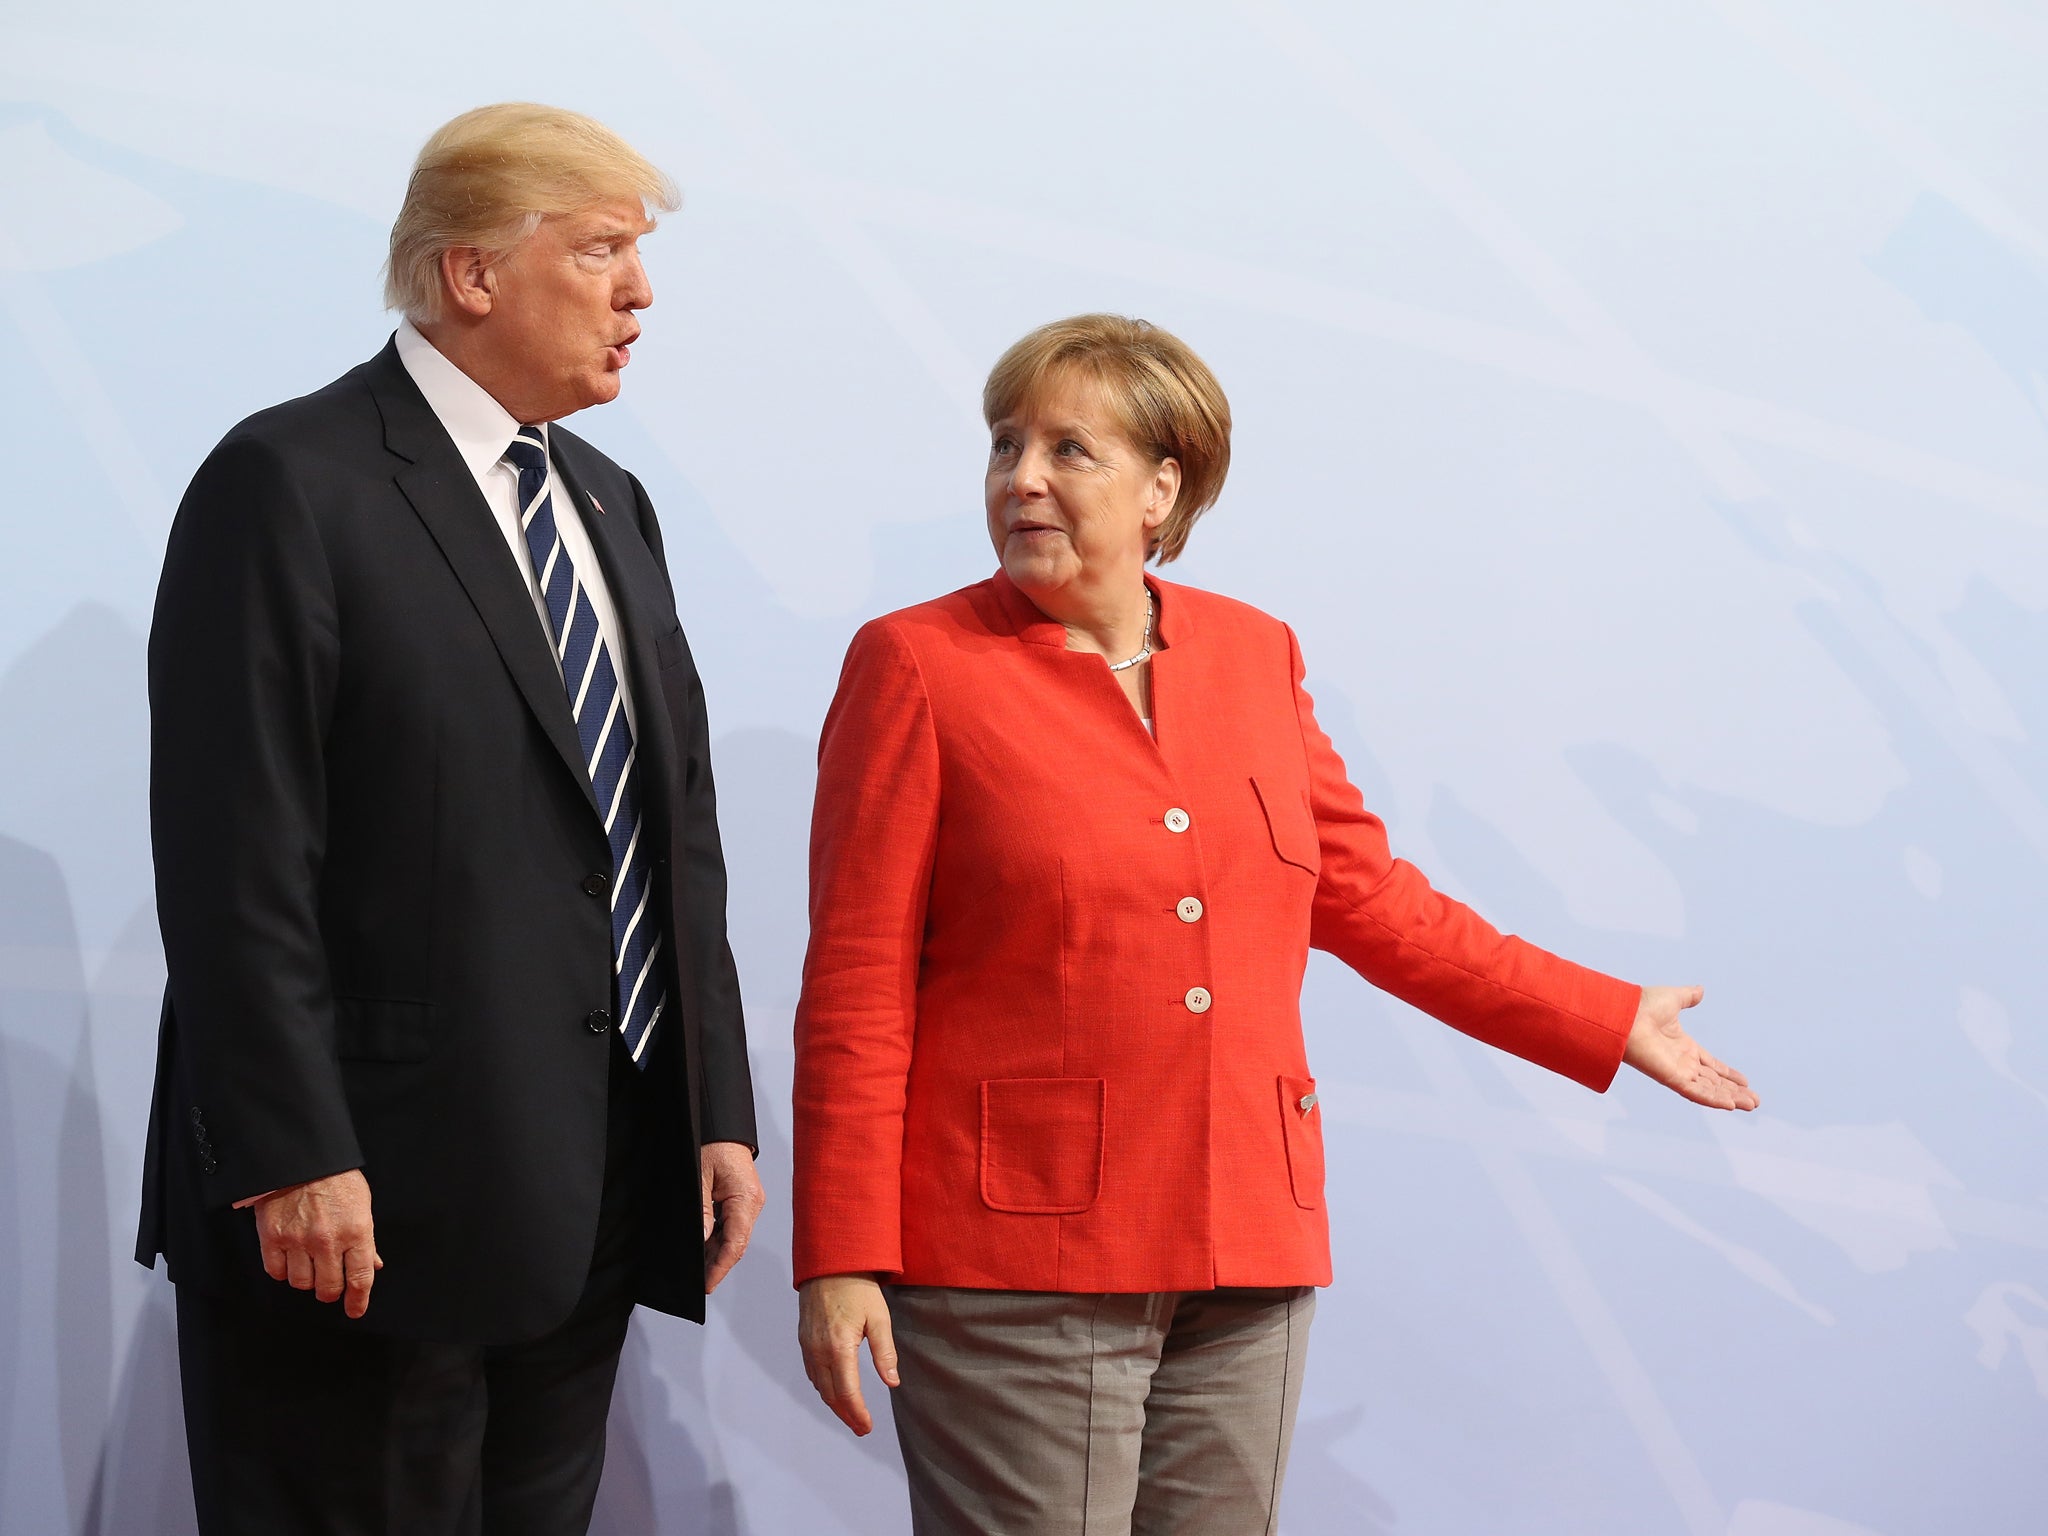 German Chancellor Angela Merkel greets US President Donald Trump upon his arrival for the first day of the G20 economic summit in Hamburg, Germany